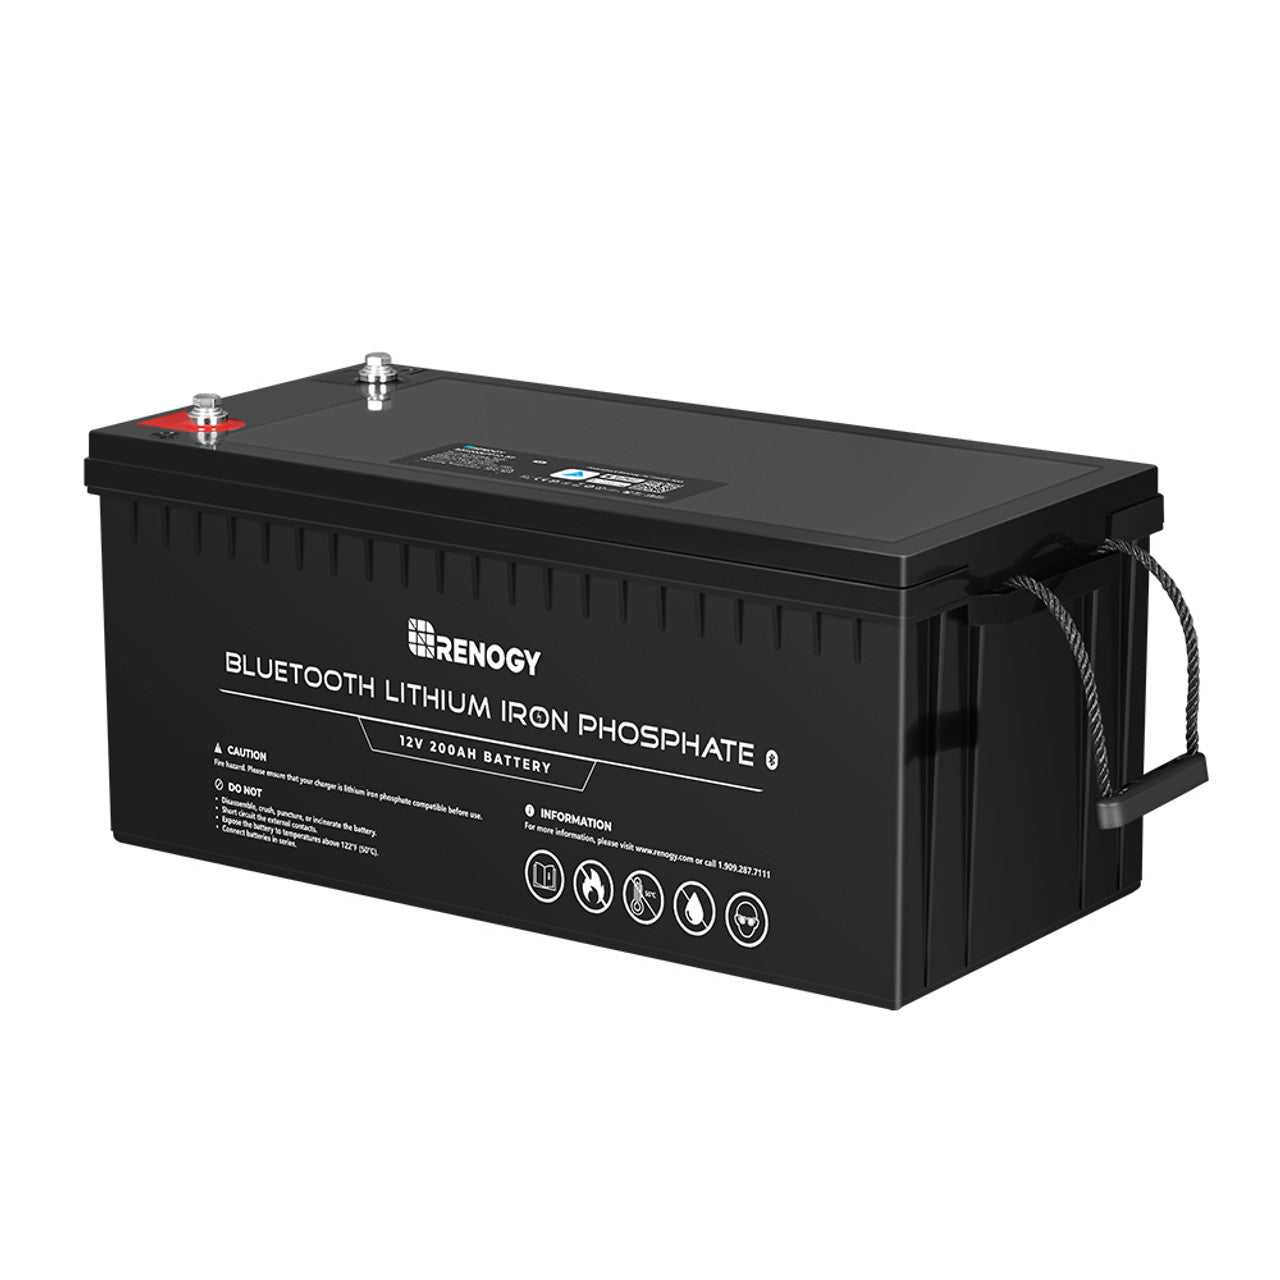 Lithium Iron Phosphate Battery with Bluetooth